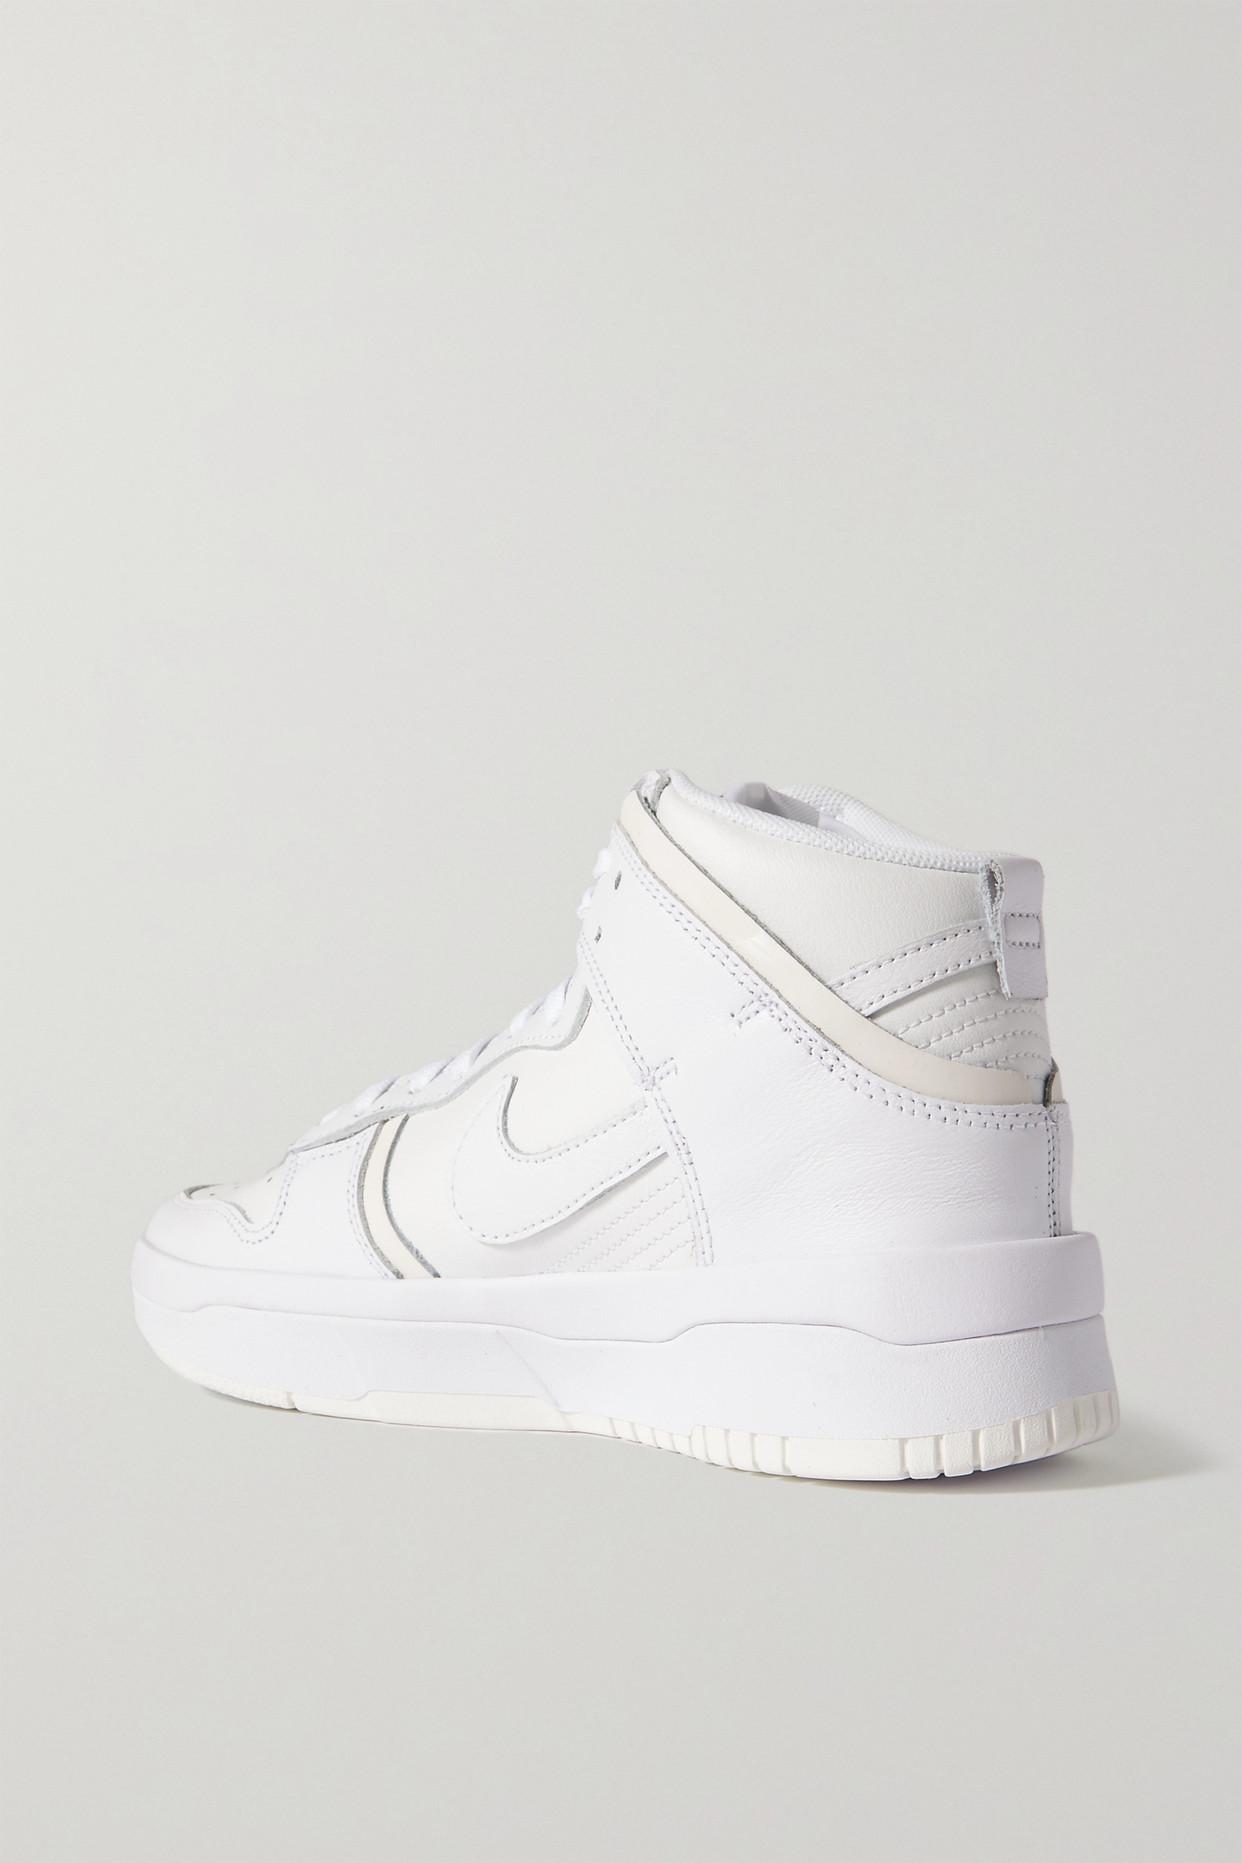 Nike Dunk Hi Rebel Leather High-top Sneakers in White | Lyst